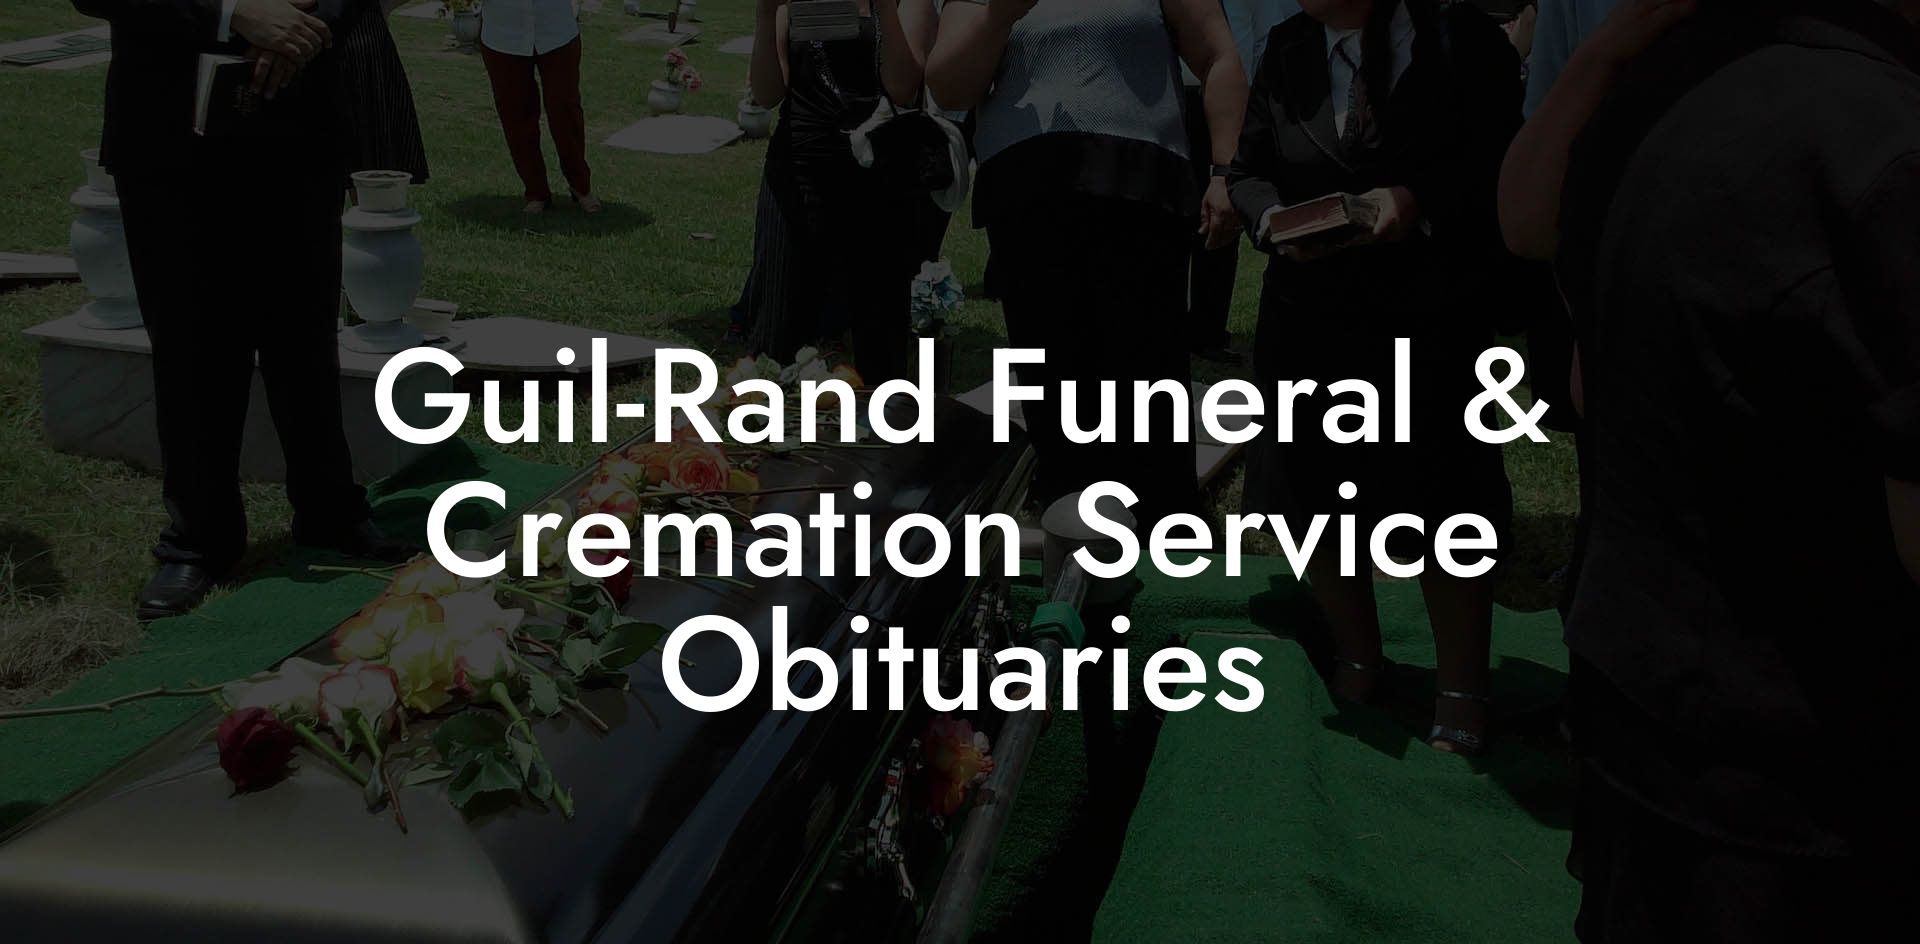 Guil-Rand Funeral & Cremation Service Obituaries